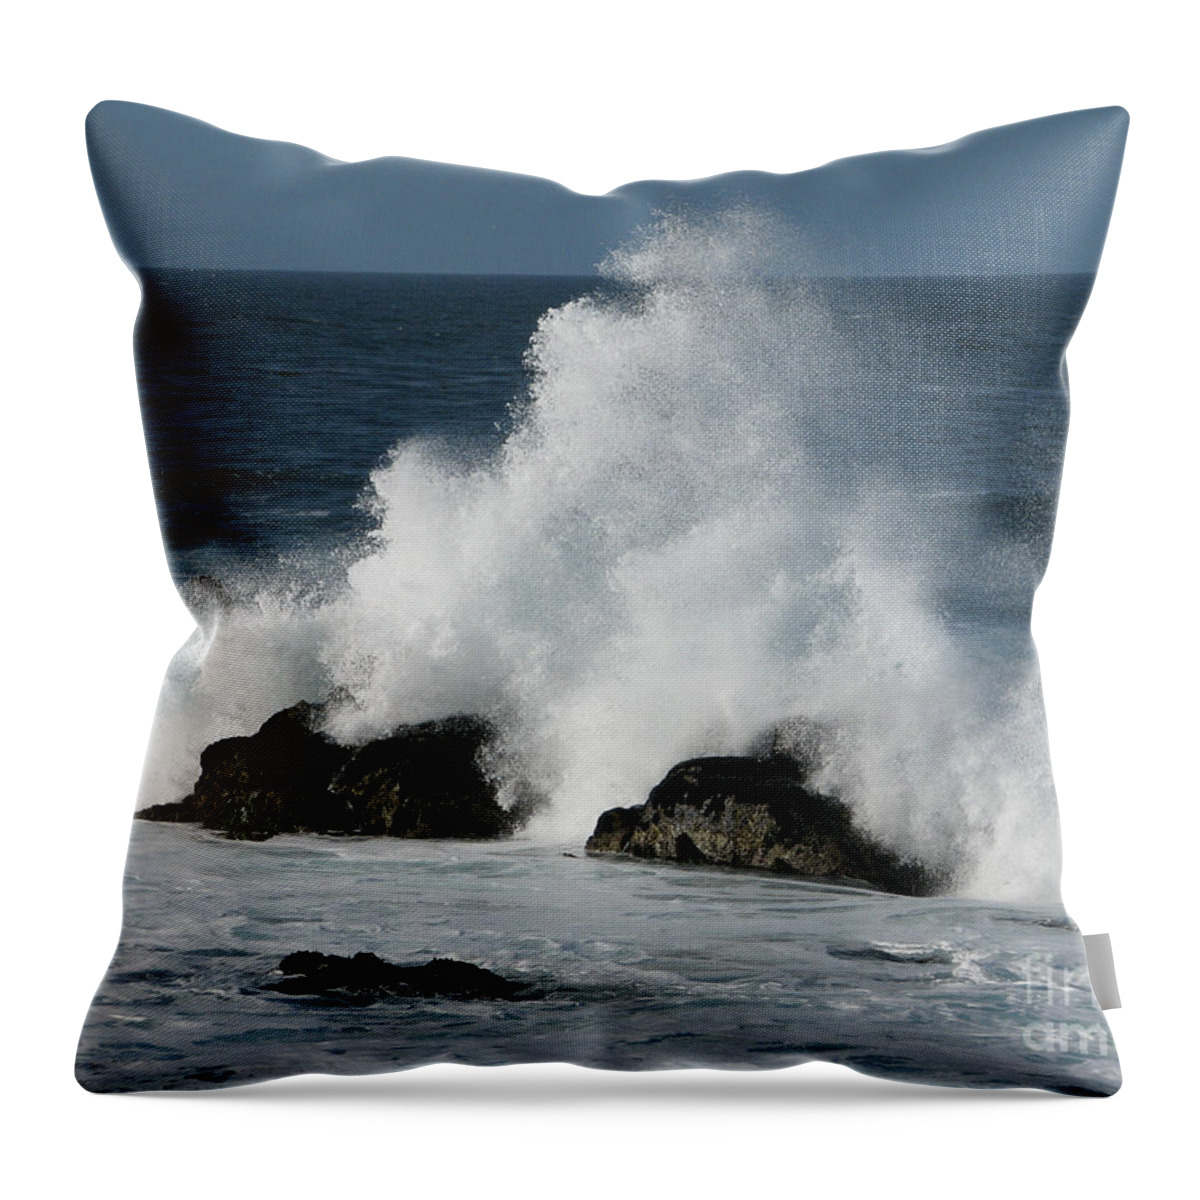 Pacific Grove Throw Pillow featuring the photograph Splash Pyramid by James B Toy